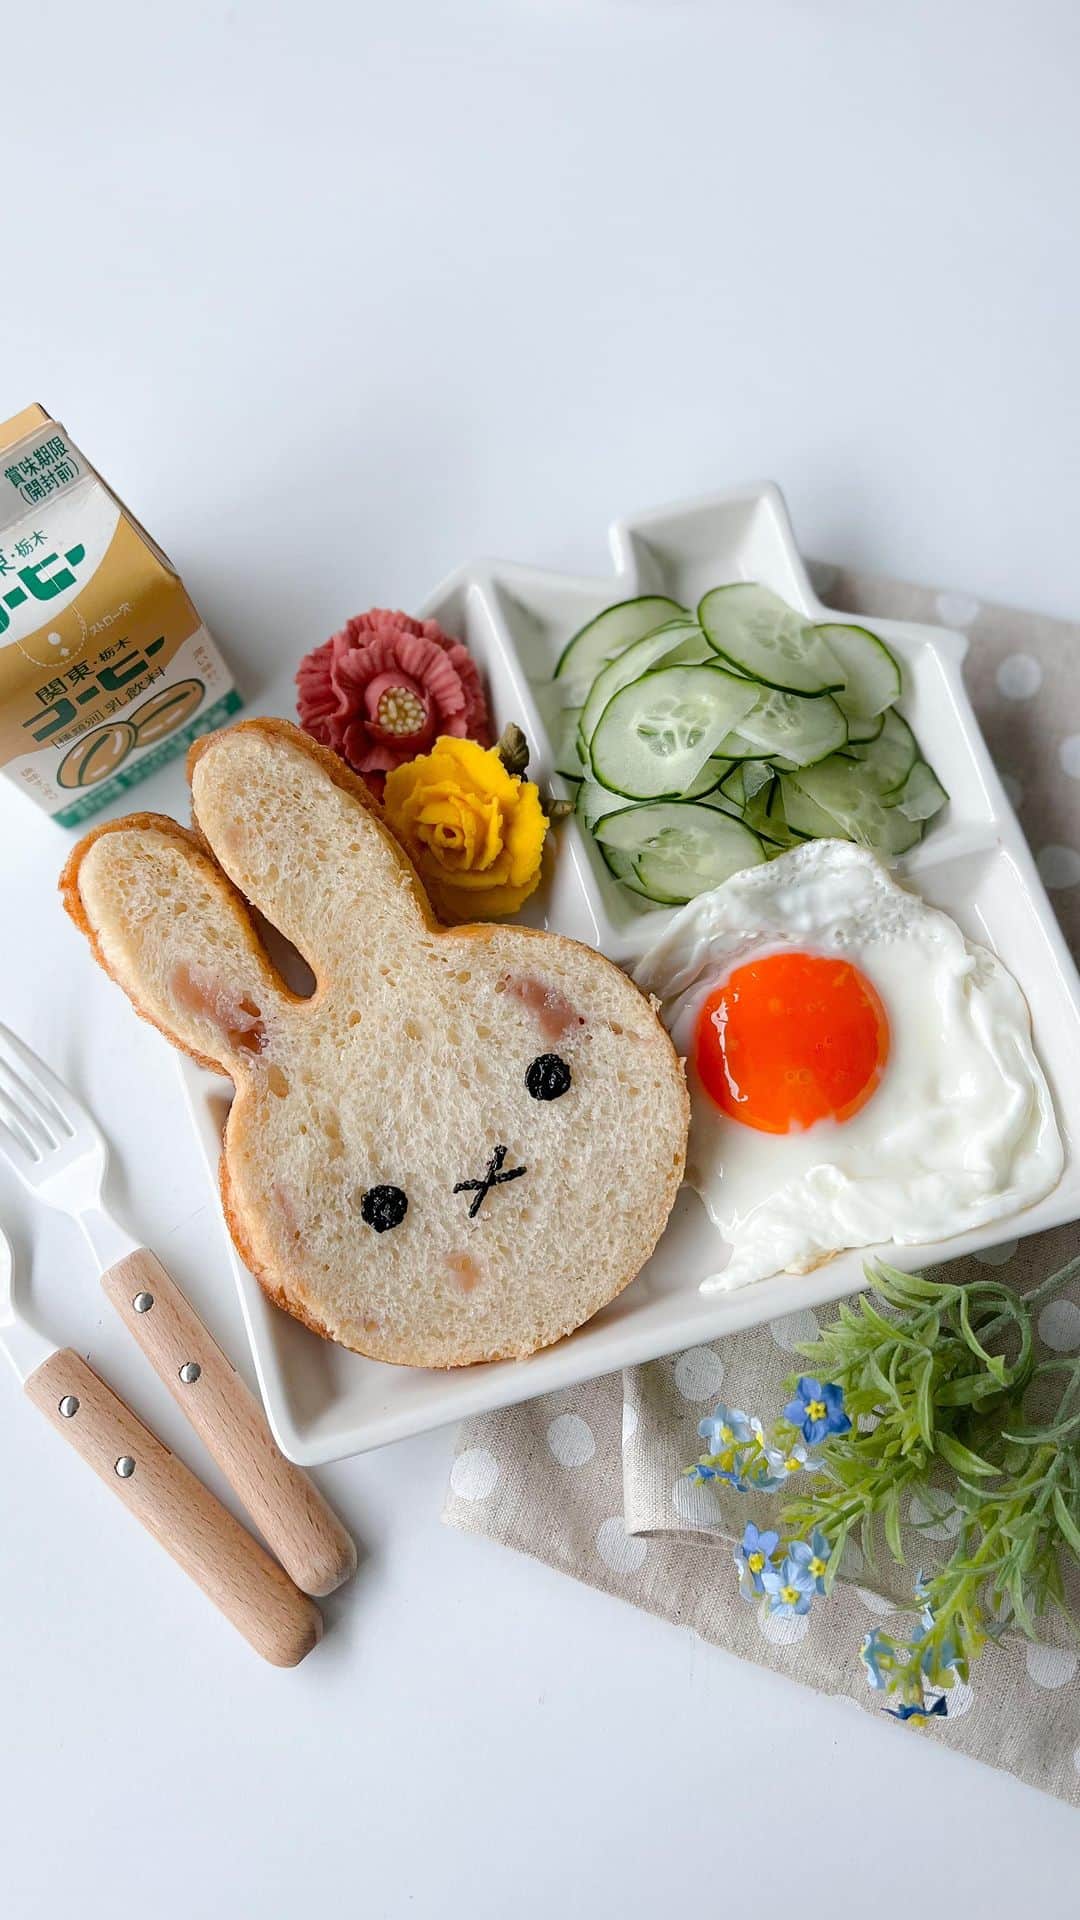 Little Miss Bento・Shirley シャリーのインスタグラム：「The best time of the day 🐰 breakfast 🍳. A rare cute treat for myself these days  I also found a new (to me) egg brand and they have this amazing orange yolk 🥚 . Love my handmade flower cookies too!」